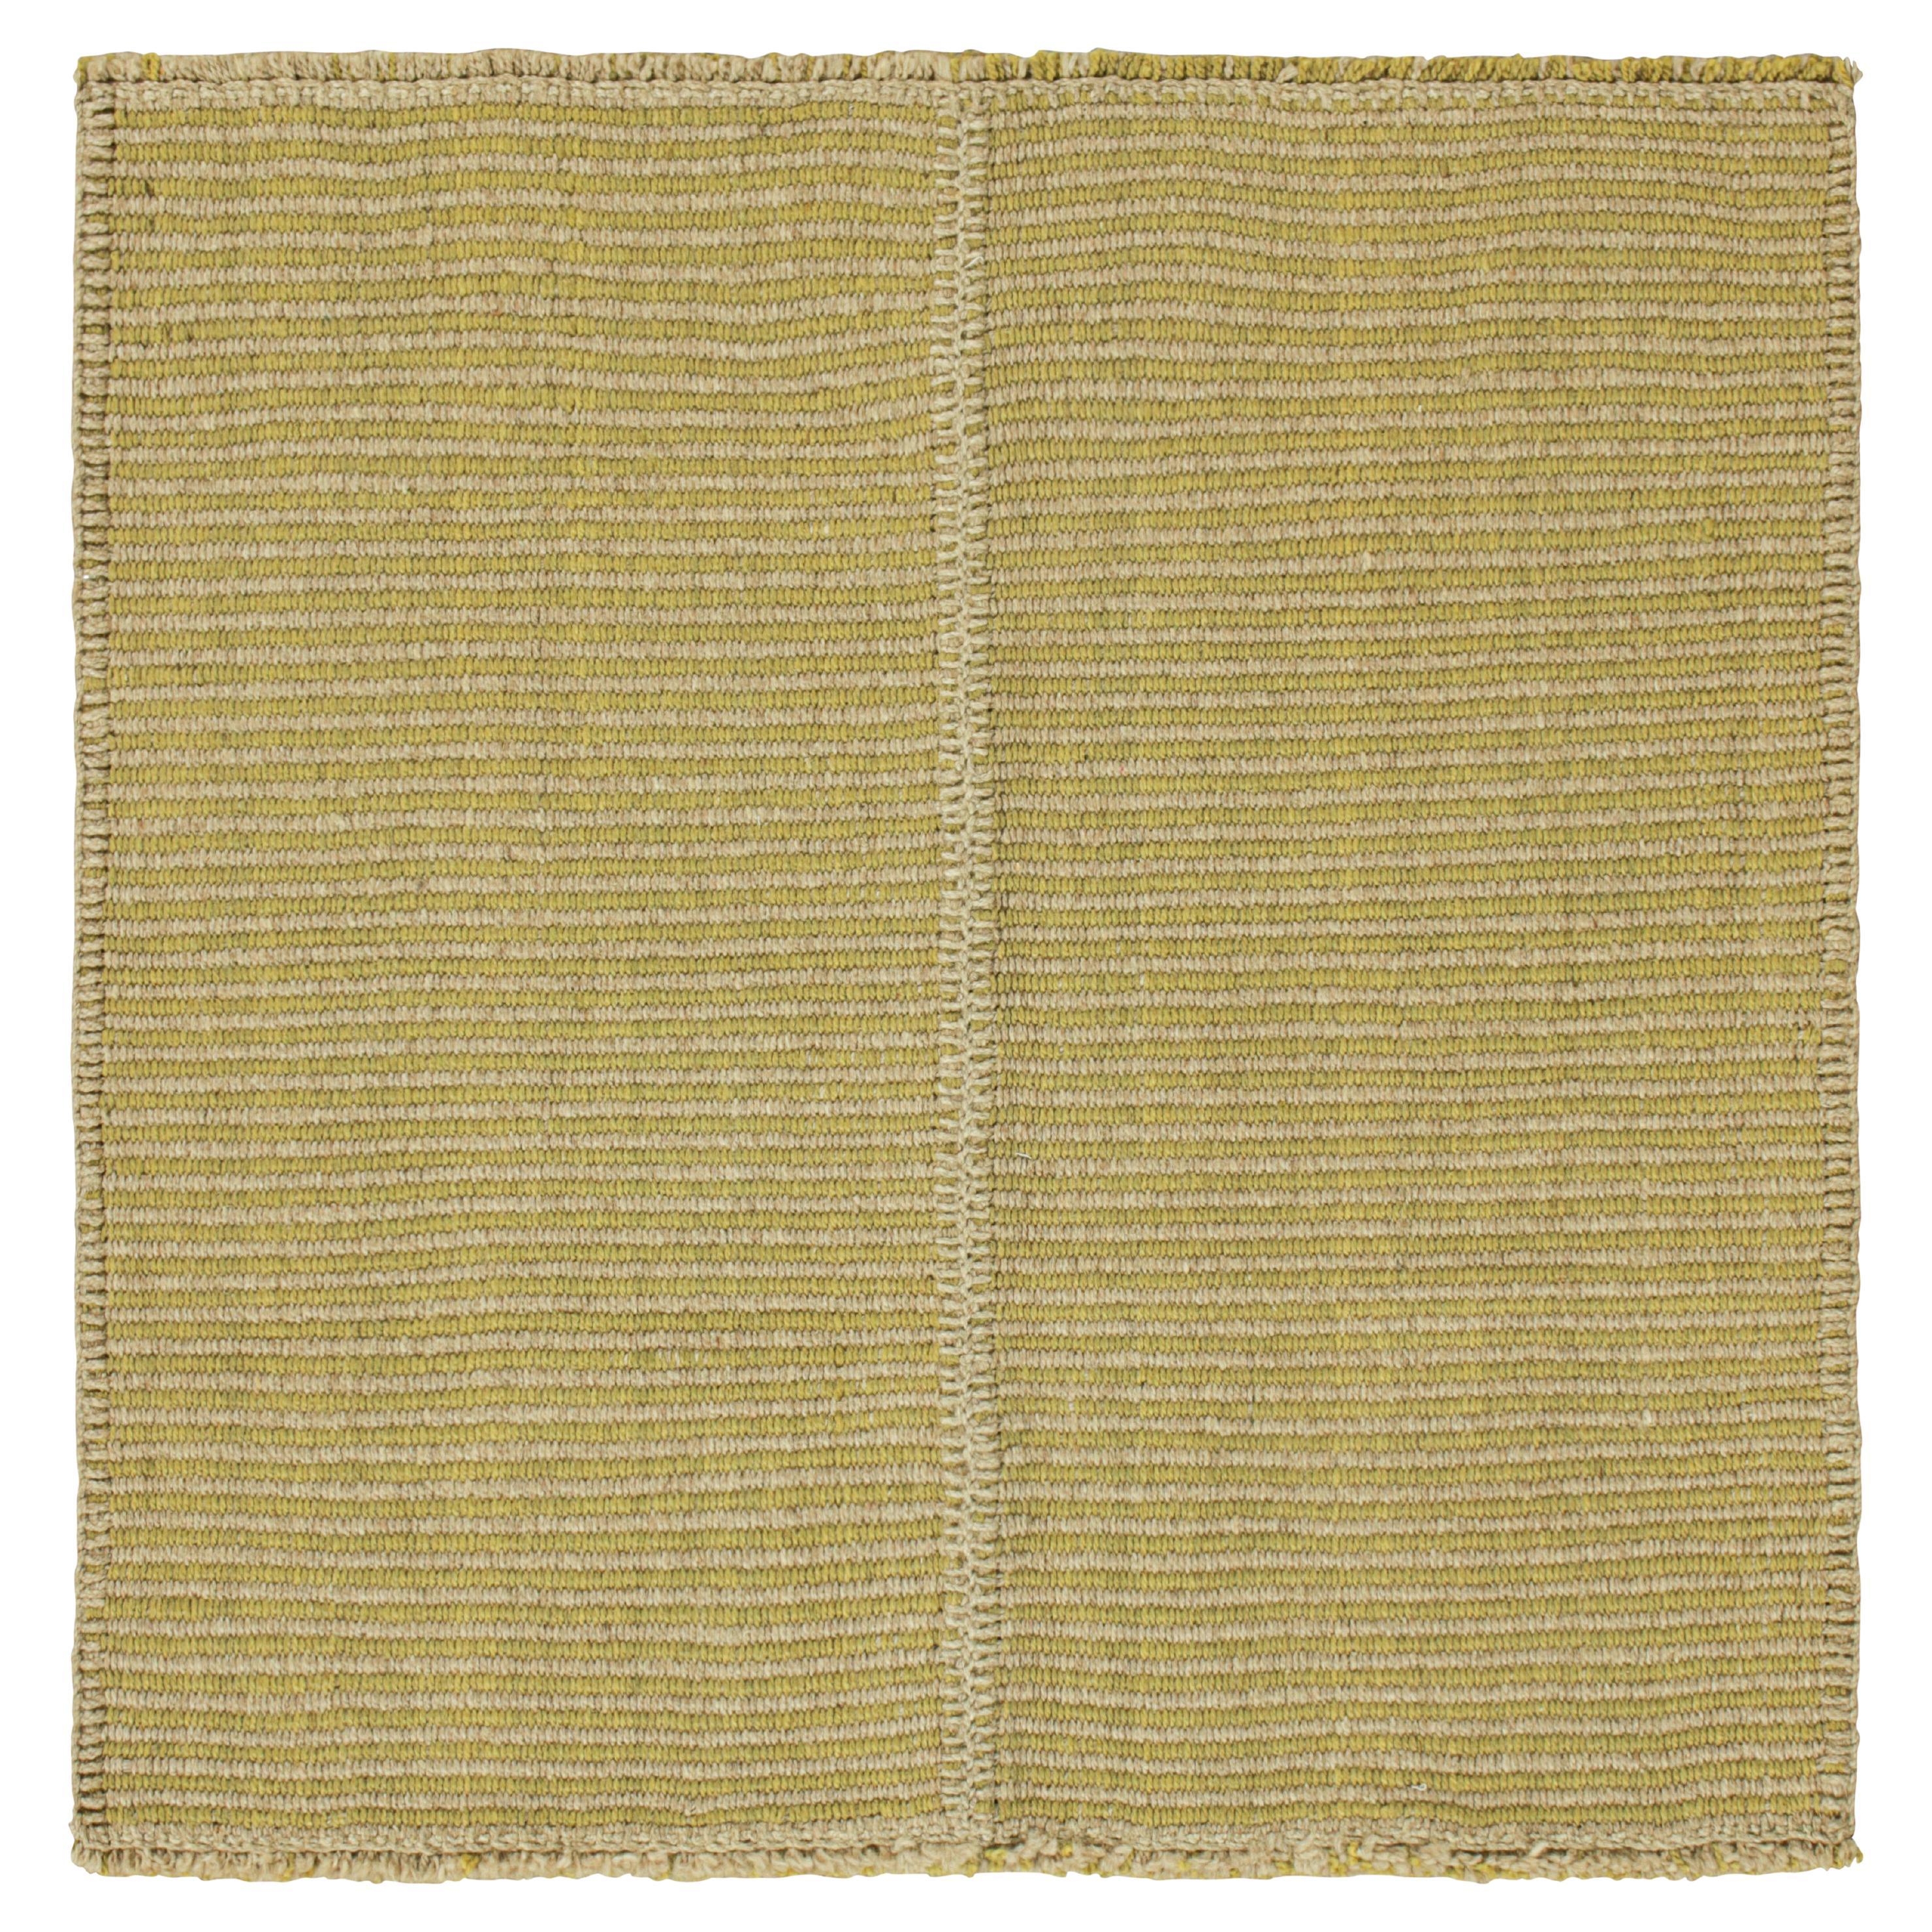 Rug & Kilim’s Contemporary Kilim with Textural Beige and Chartreuse Stripes